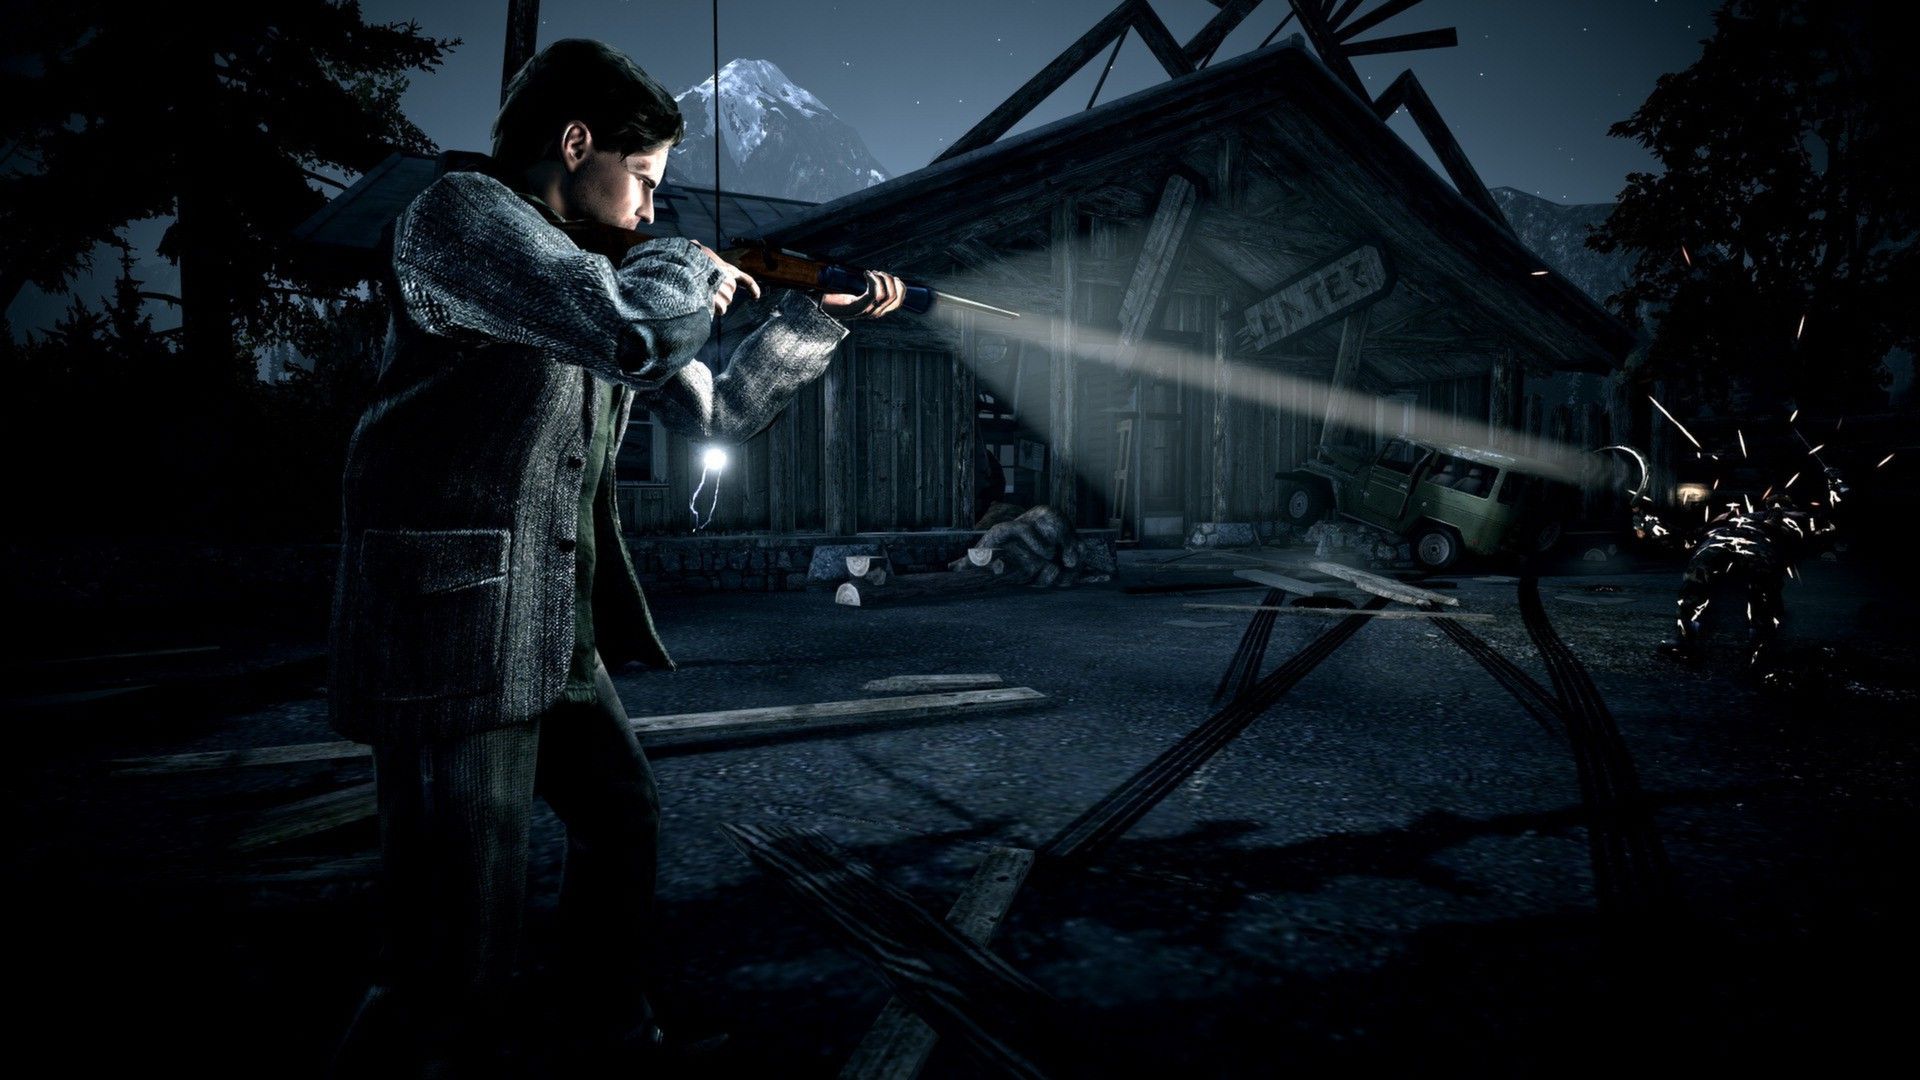 Alan Wake aiming his rifle and torch at the dead of night.